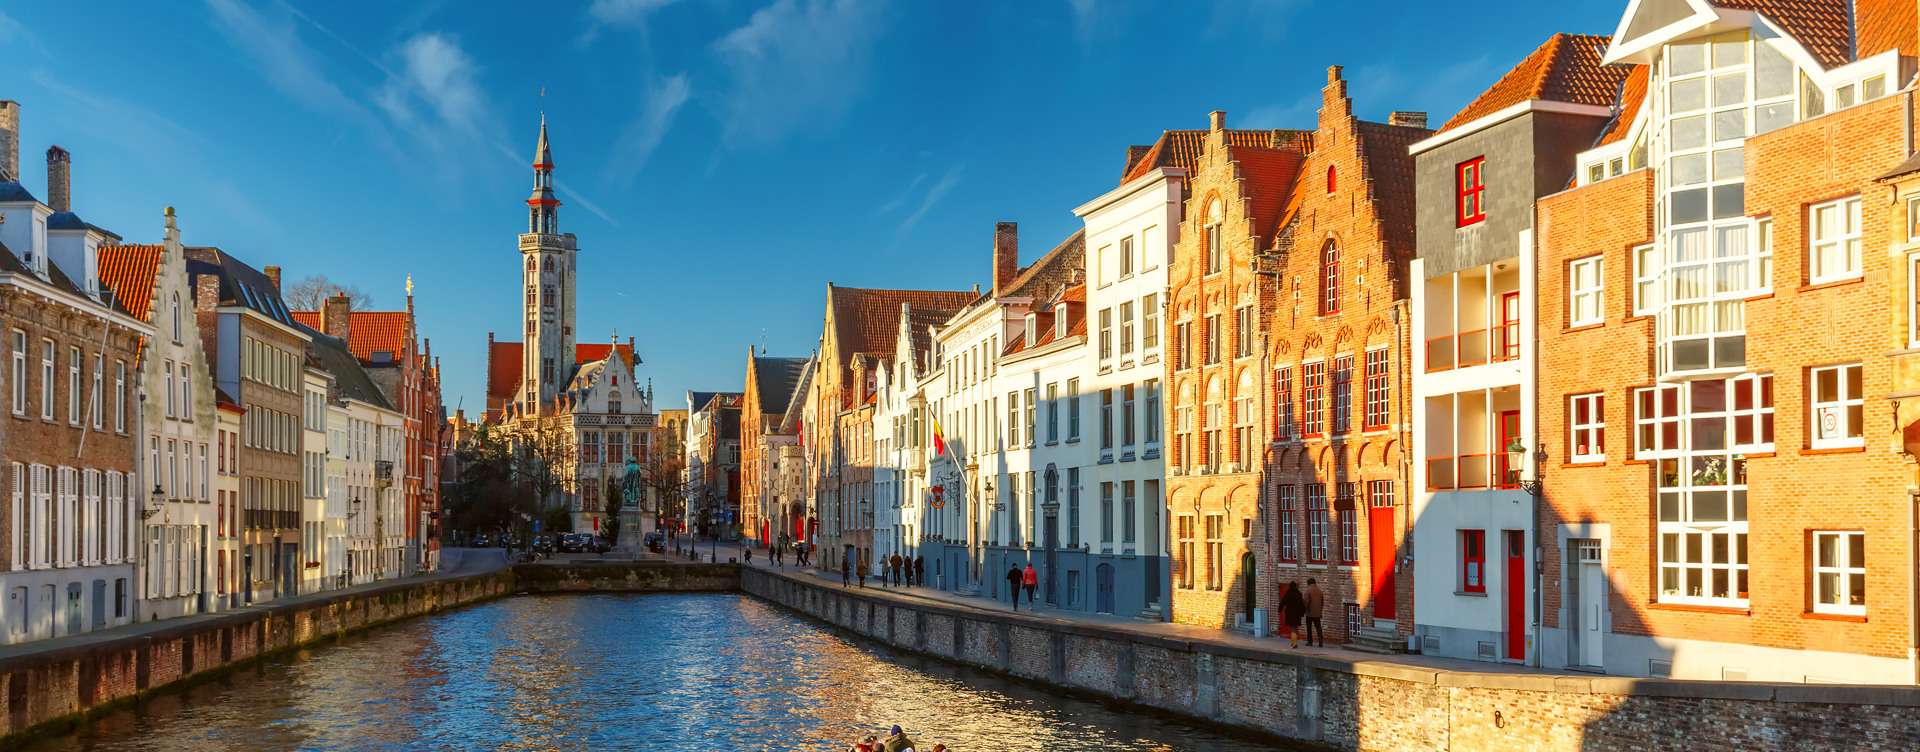 Go to Bruges for a day
during your stay at Nieuwvliet-Bad